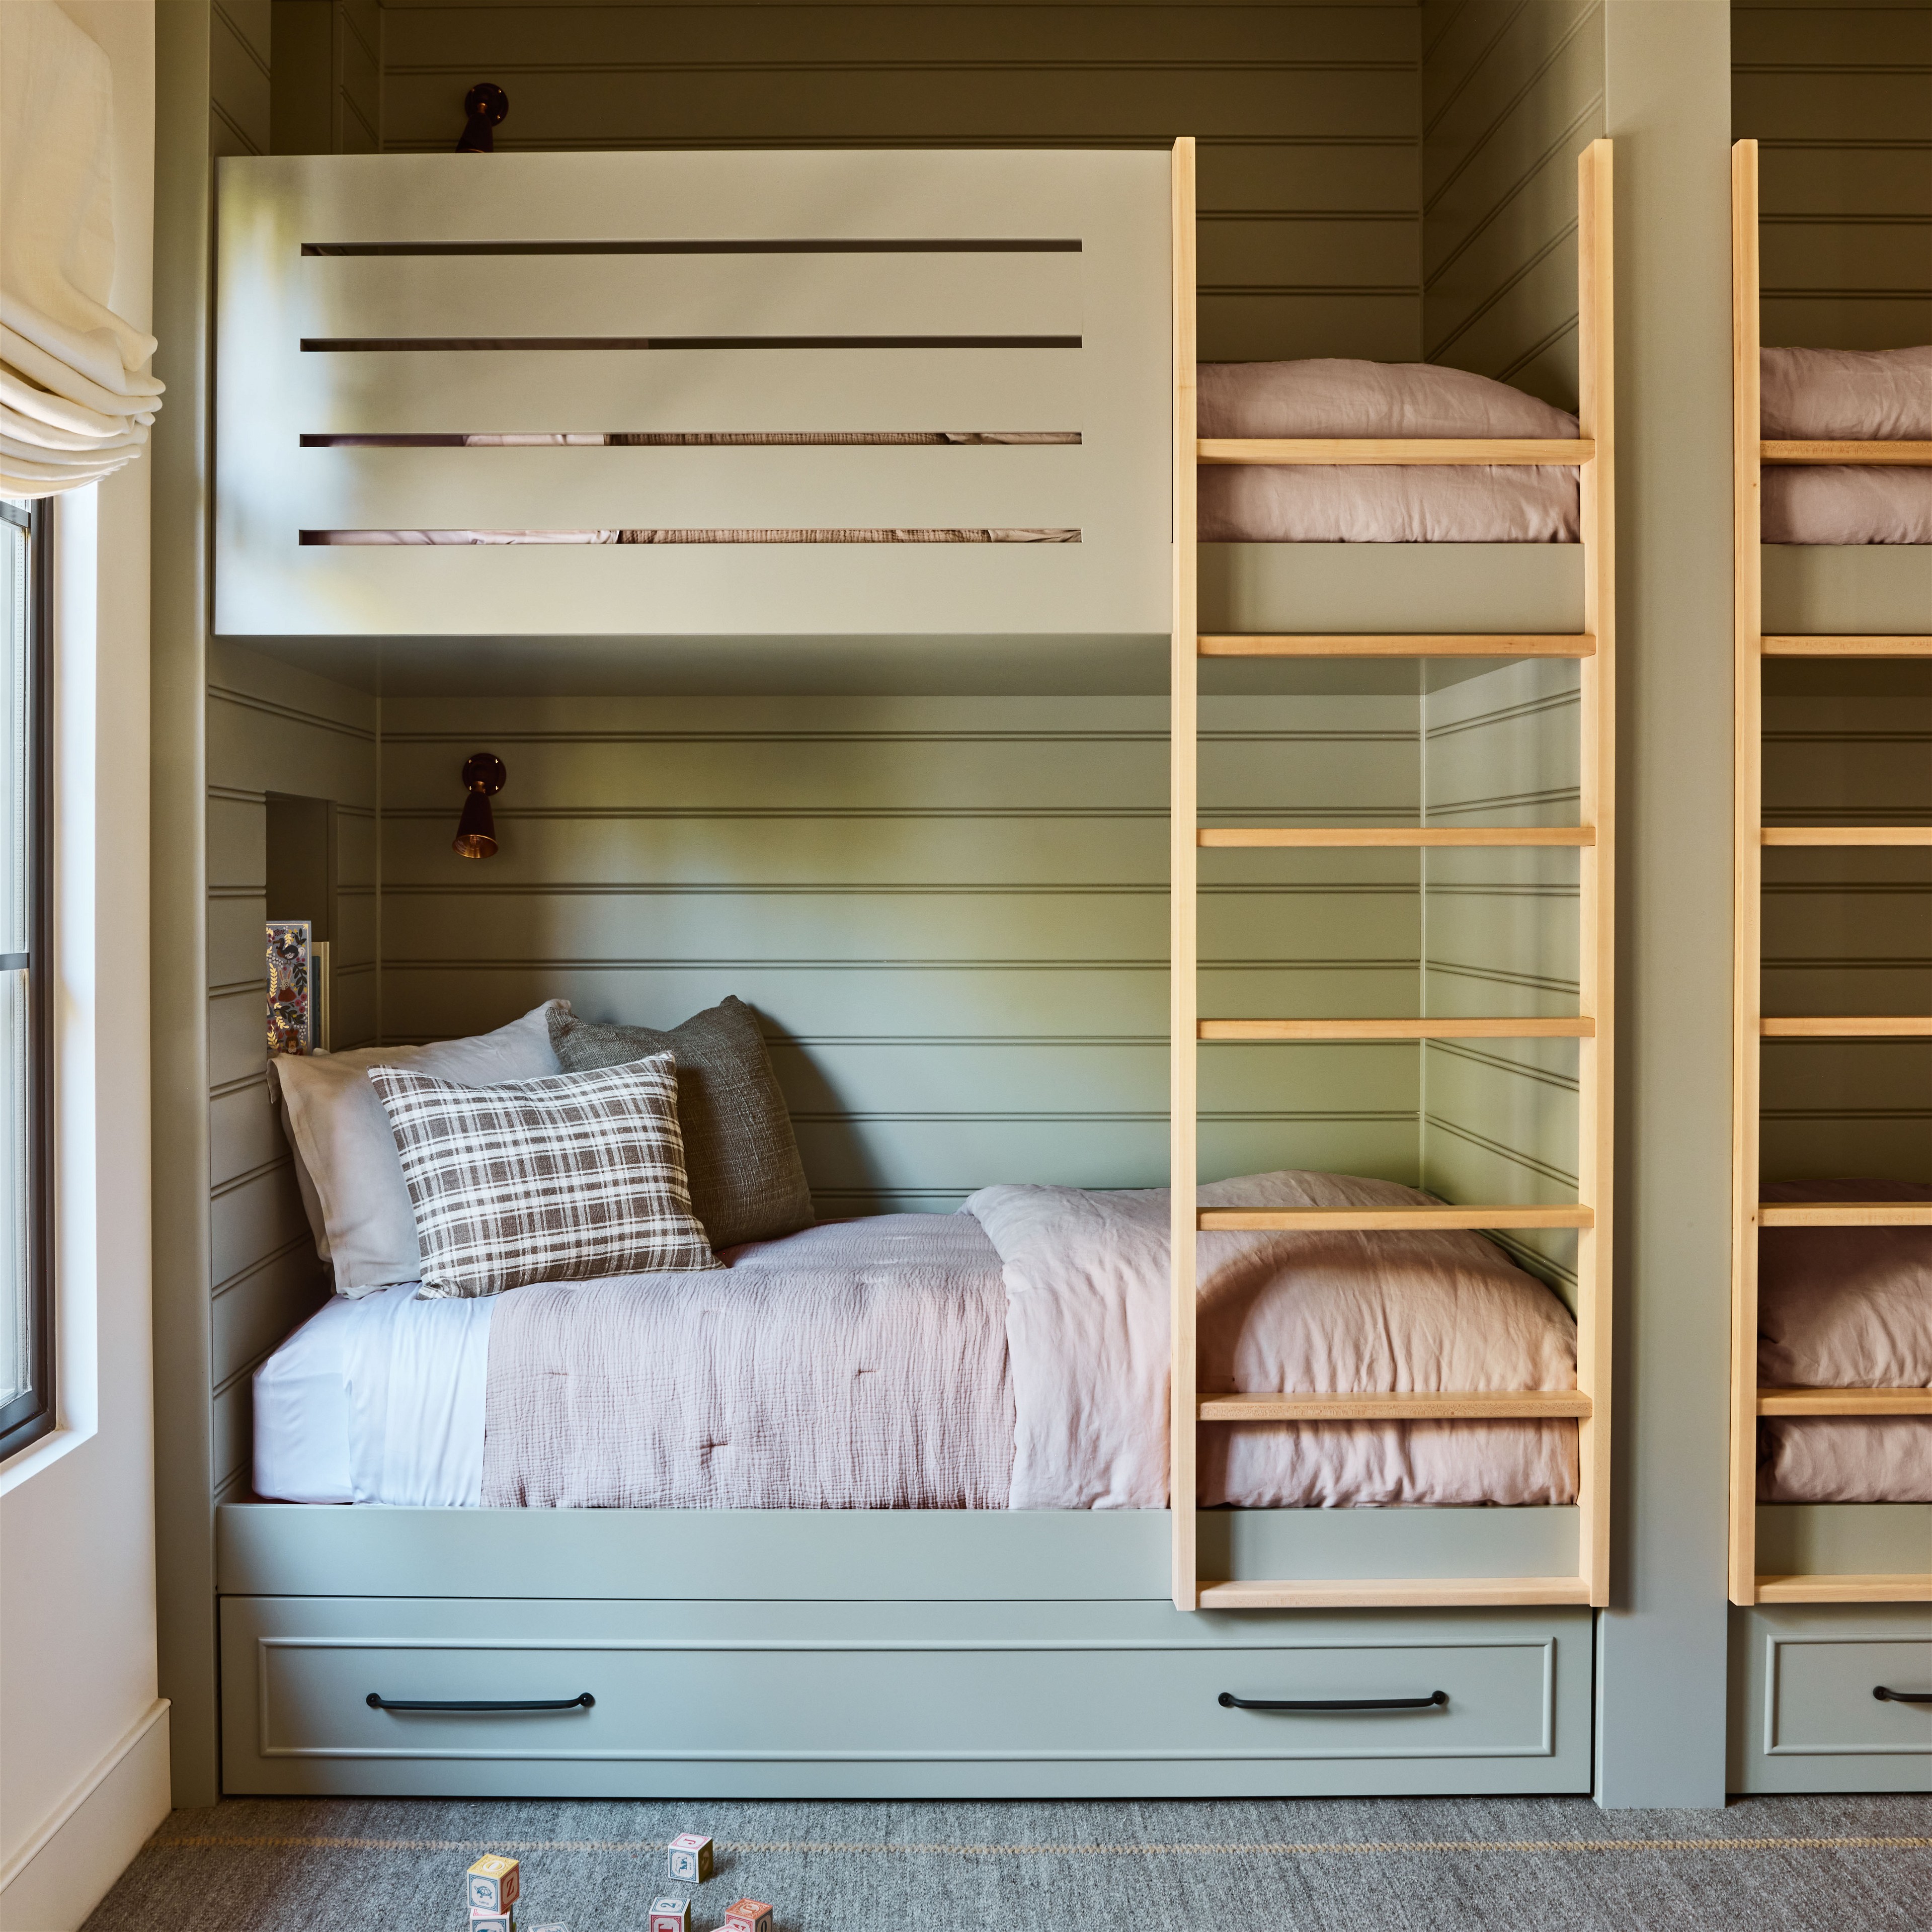 a bunk bed in a room with bunk beds